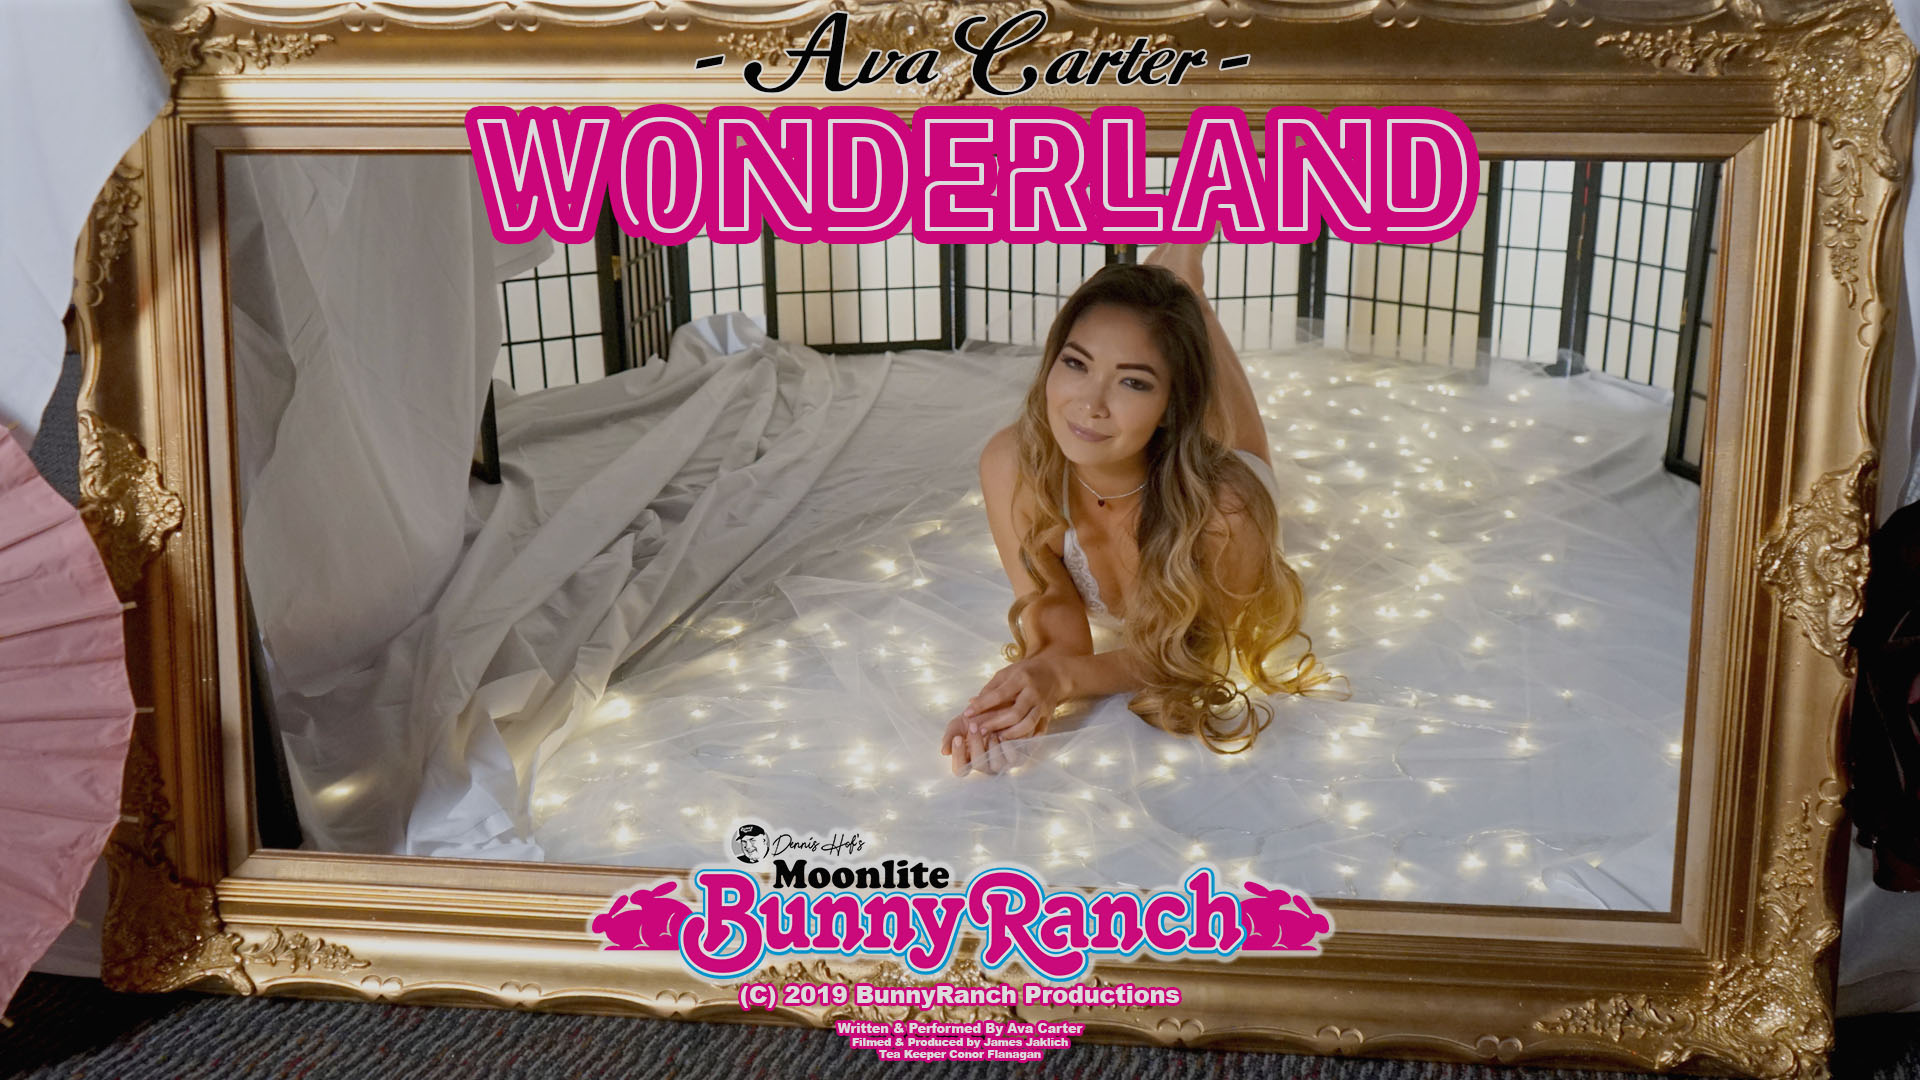 Music Video Features Moonlite Bunnyranch Sex Worker Serving Carson City For Over 150 Years 2074